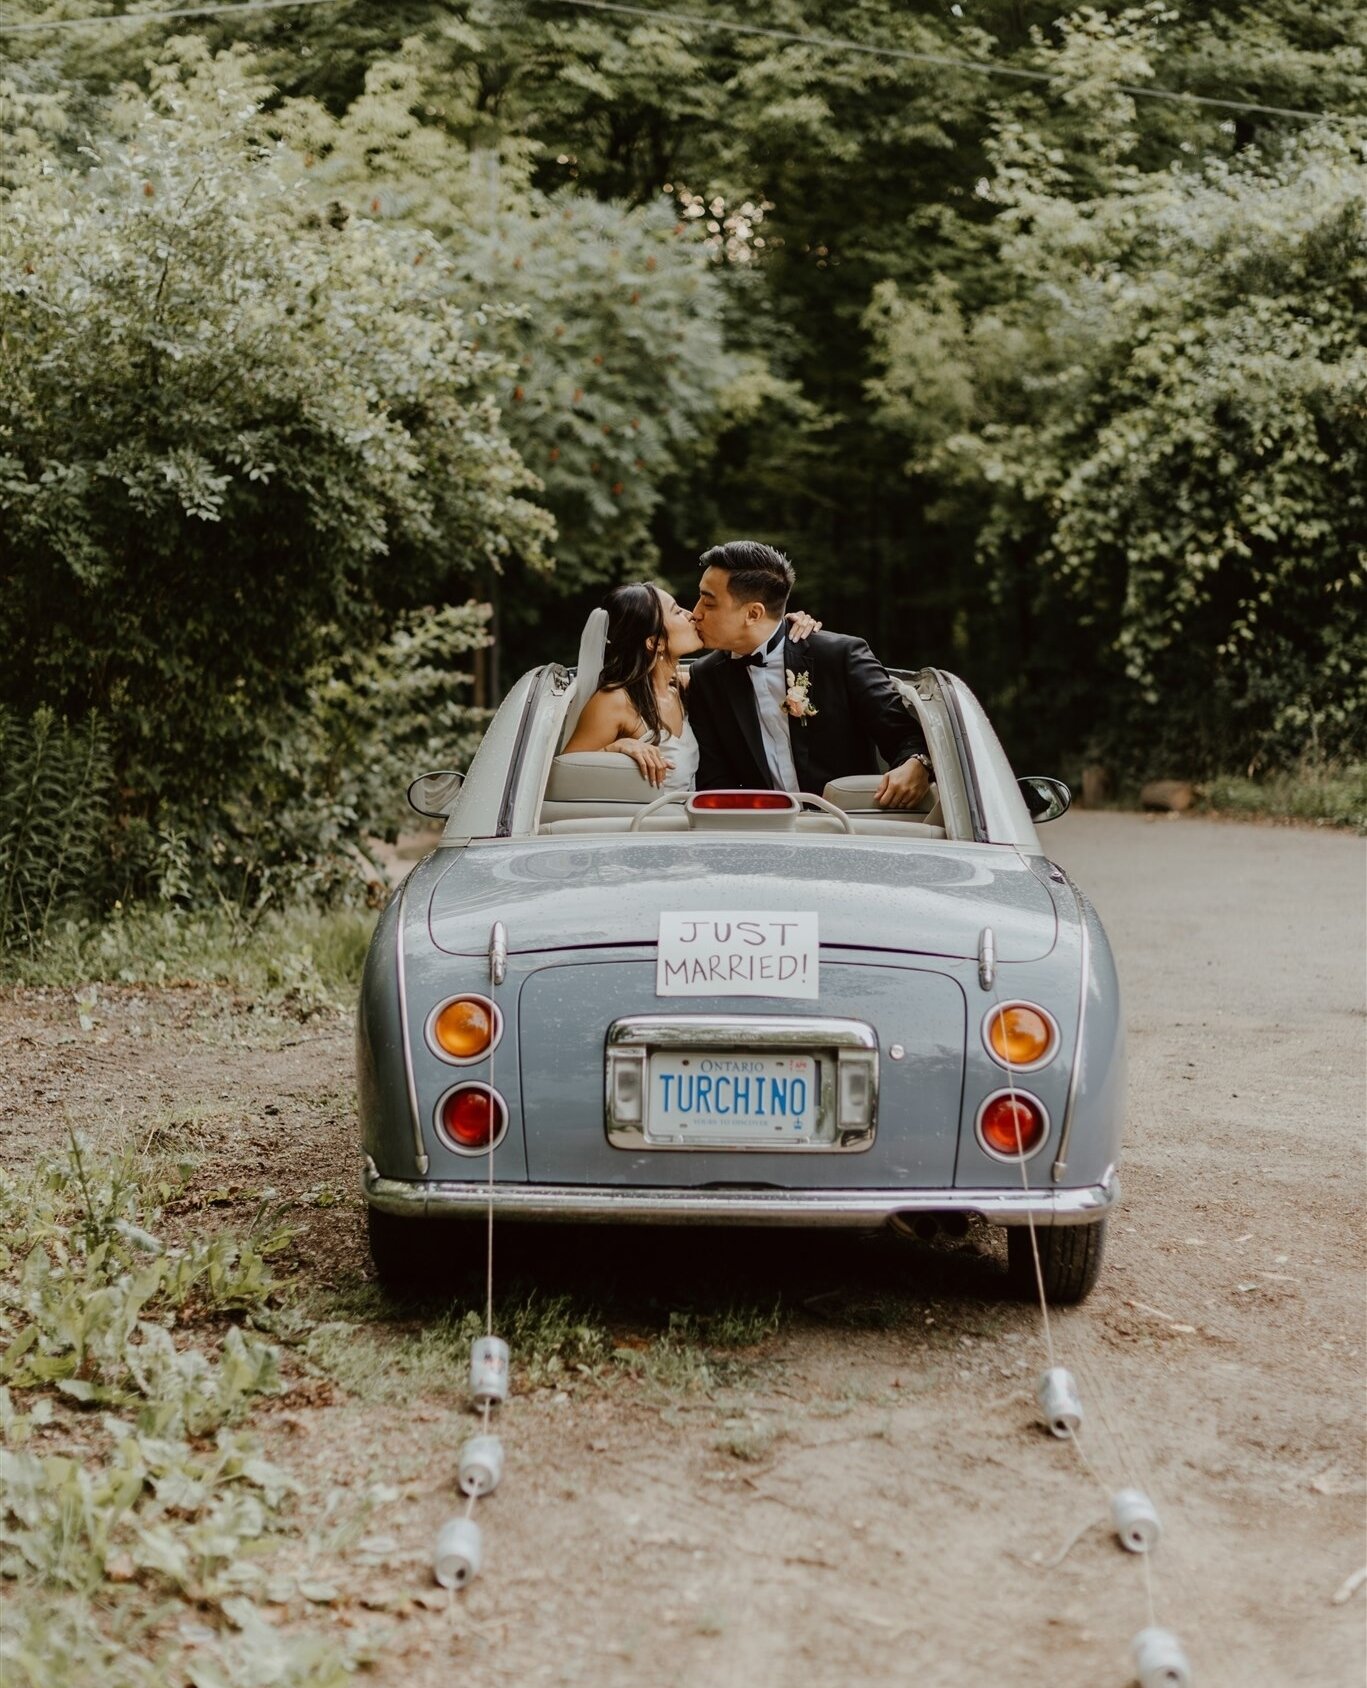 When your best man surprises you with this setup! This surprise made it a picture-perfect and memorable moment. ⁠
⁠
Click the link in our bio for more of this classy wedding.⁠
⁠
Captured beautifully through the lens of Jessilynn Wong Photography.⁠
⁠
